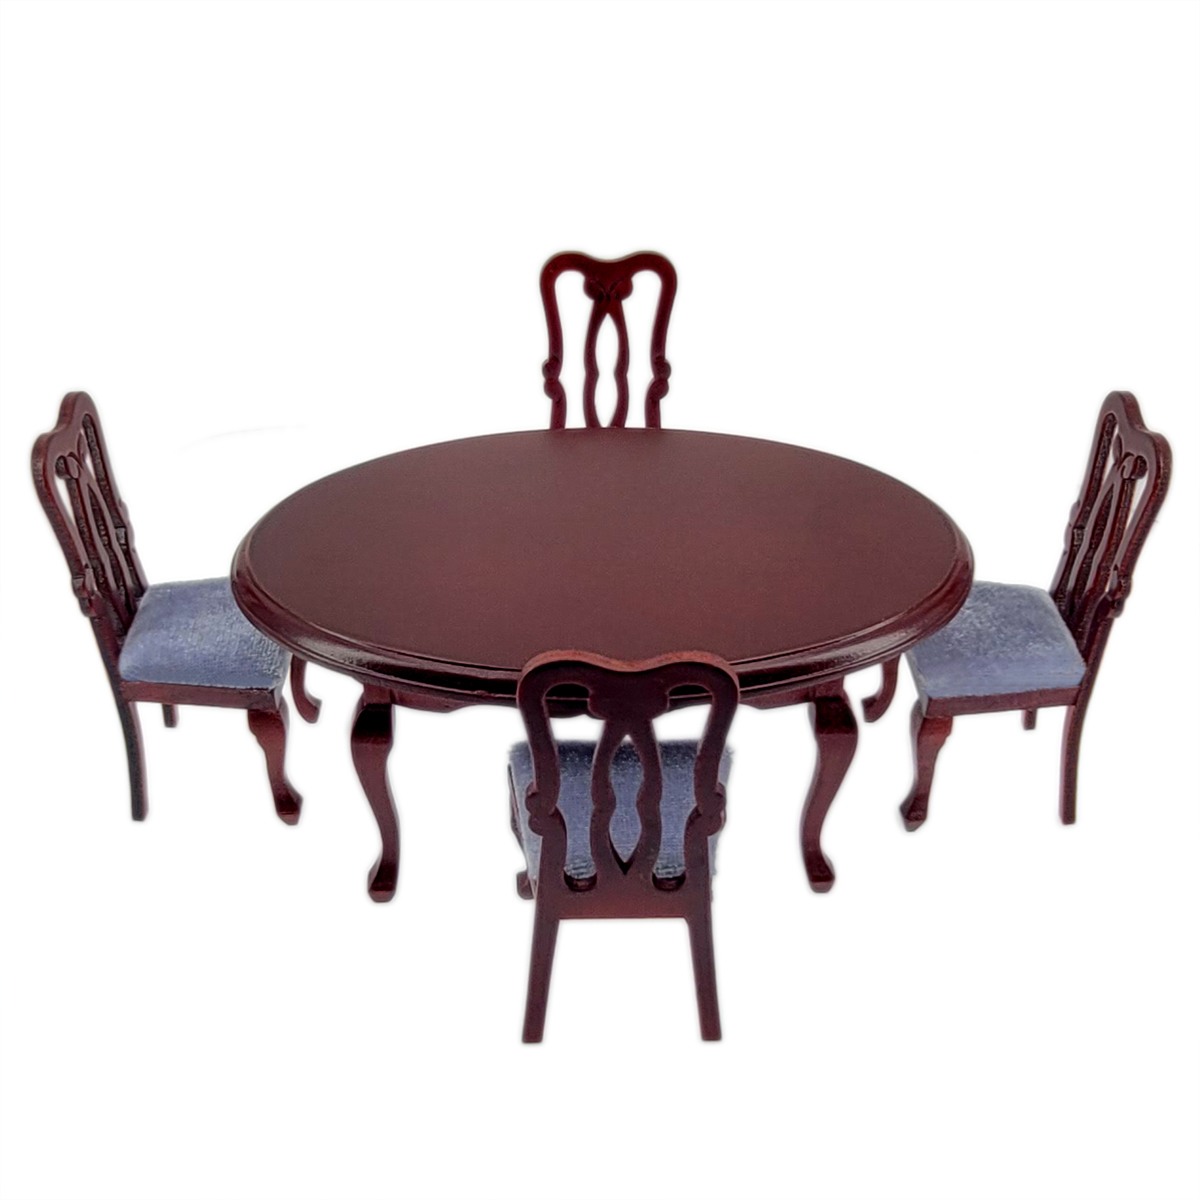 Dining Room Table 4 Upholstered Chairs, Dining Room Table Sets With Upholstered Chairs